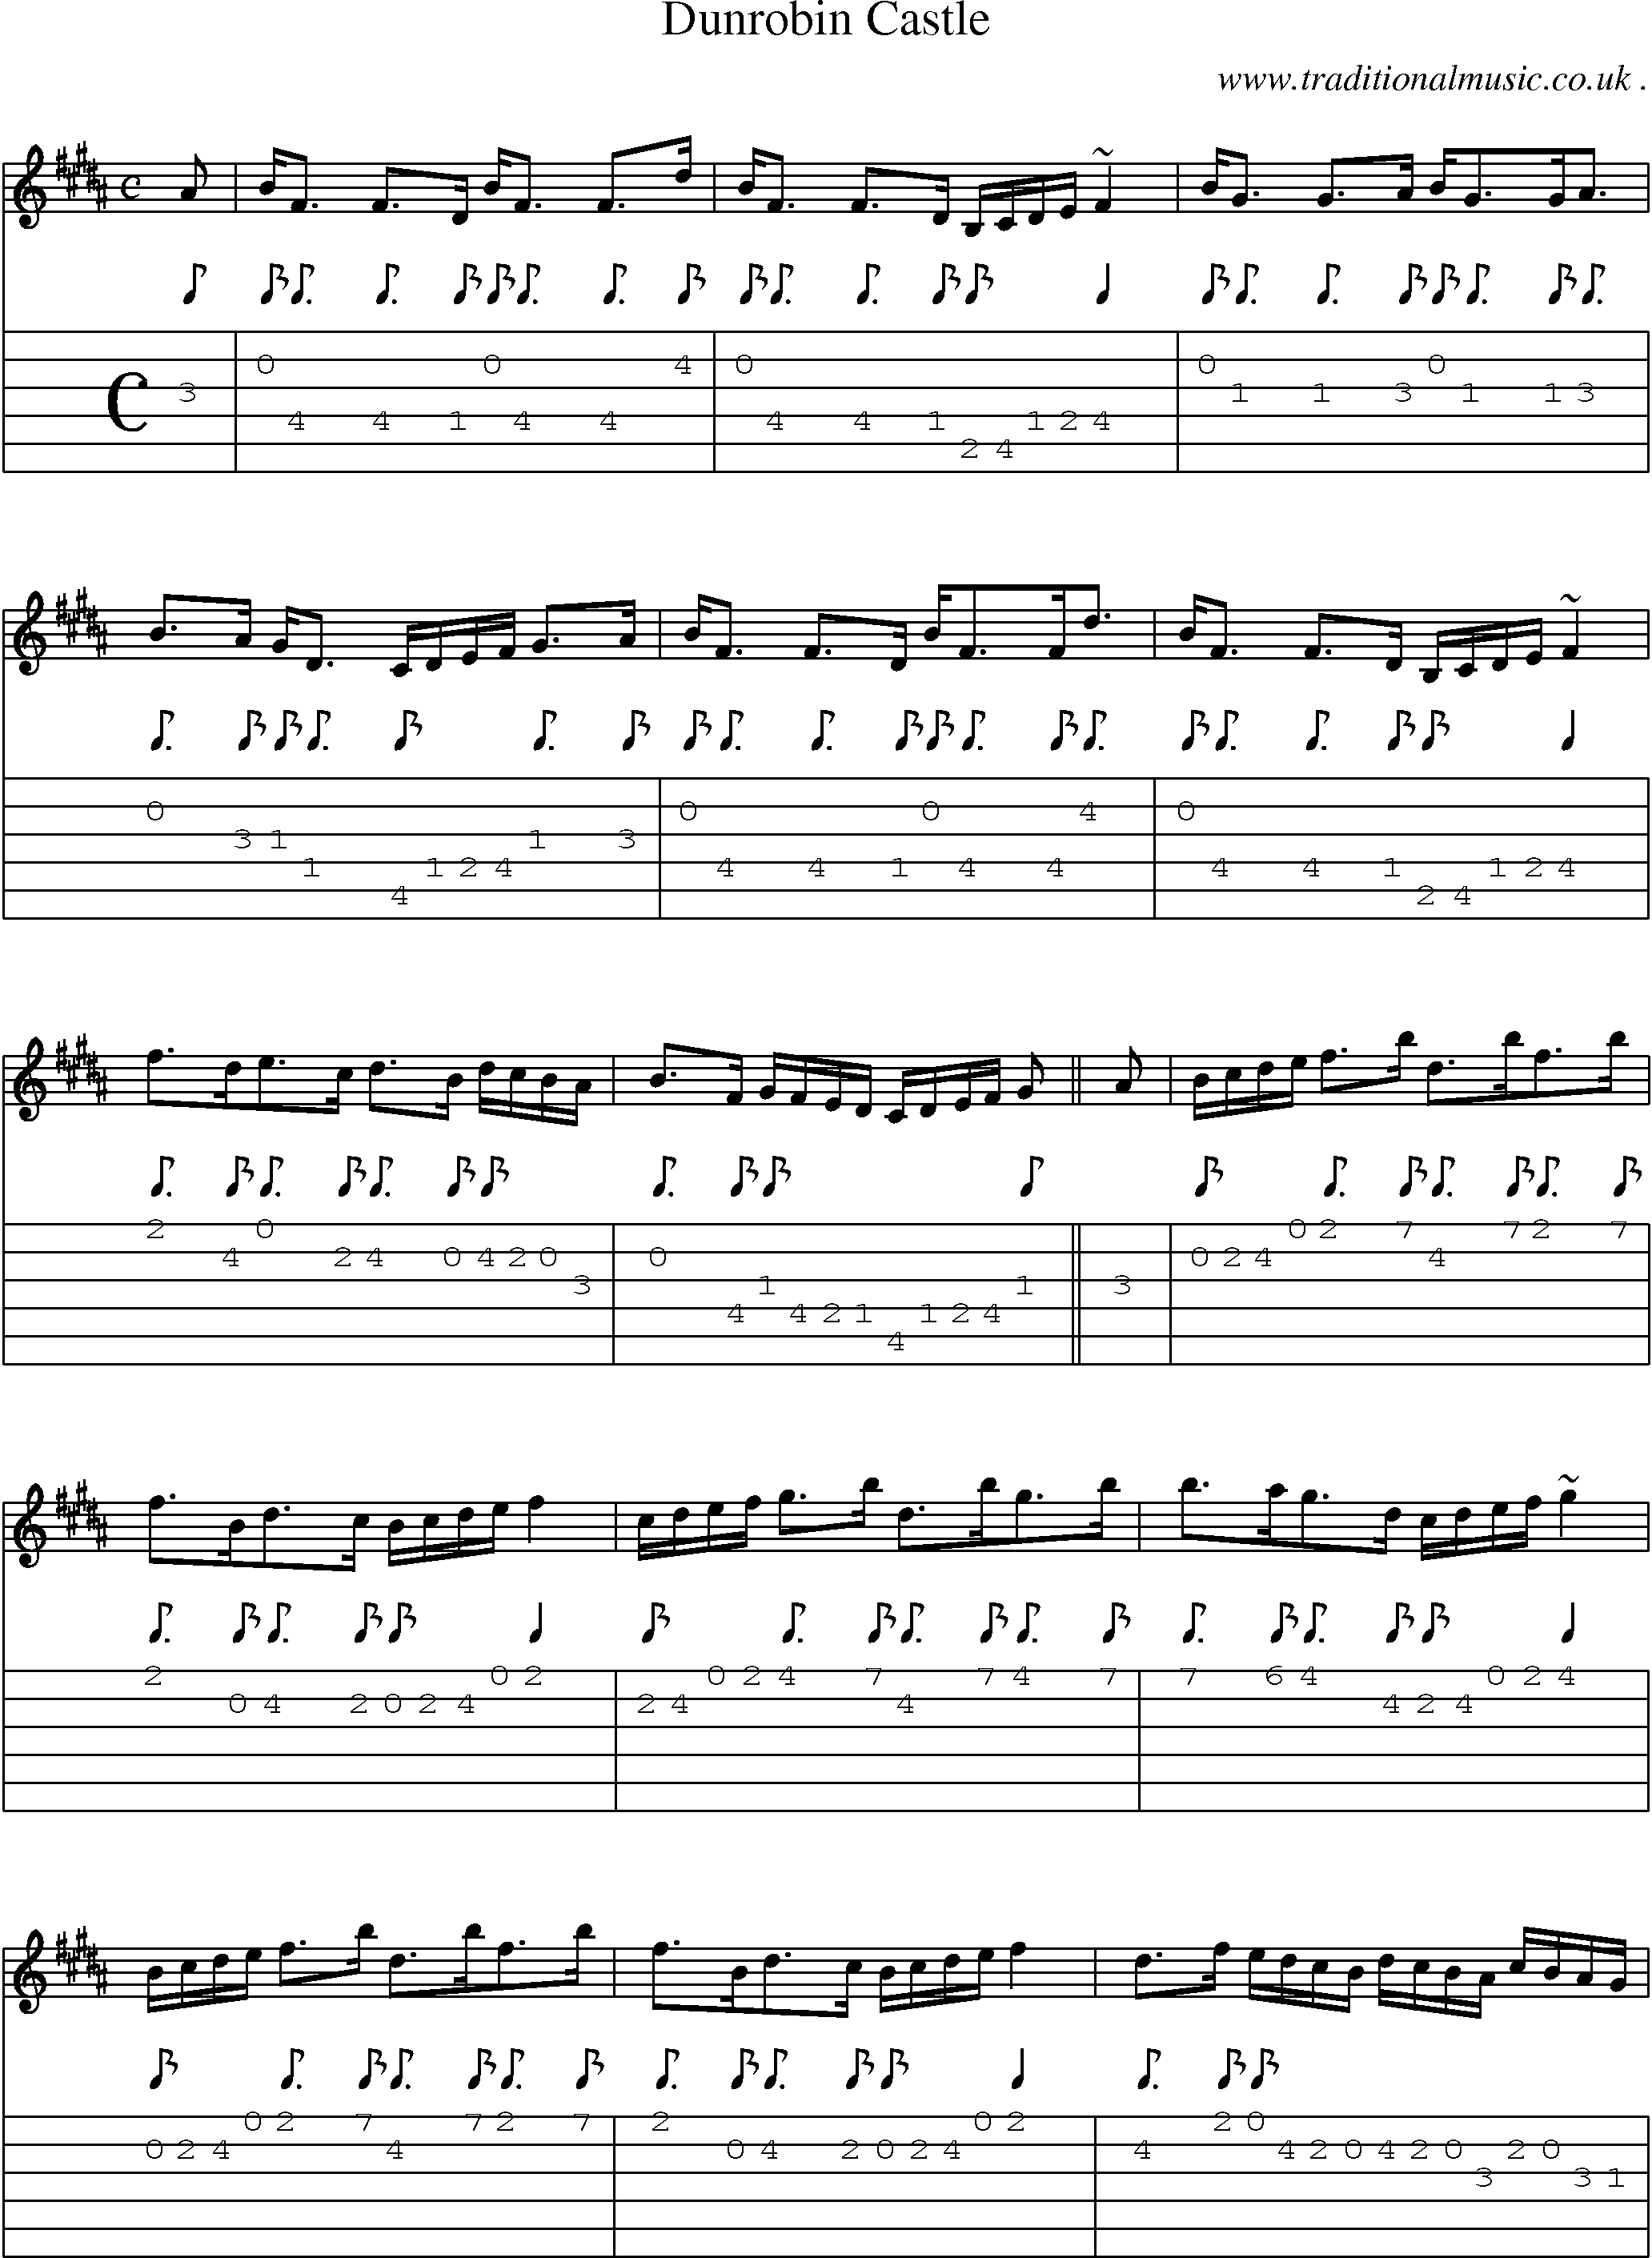 Sheet-music  score, Chords and Guitar Tabs for Dunrobin Castle